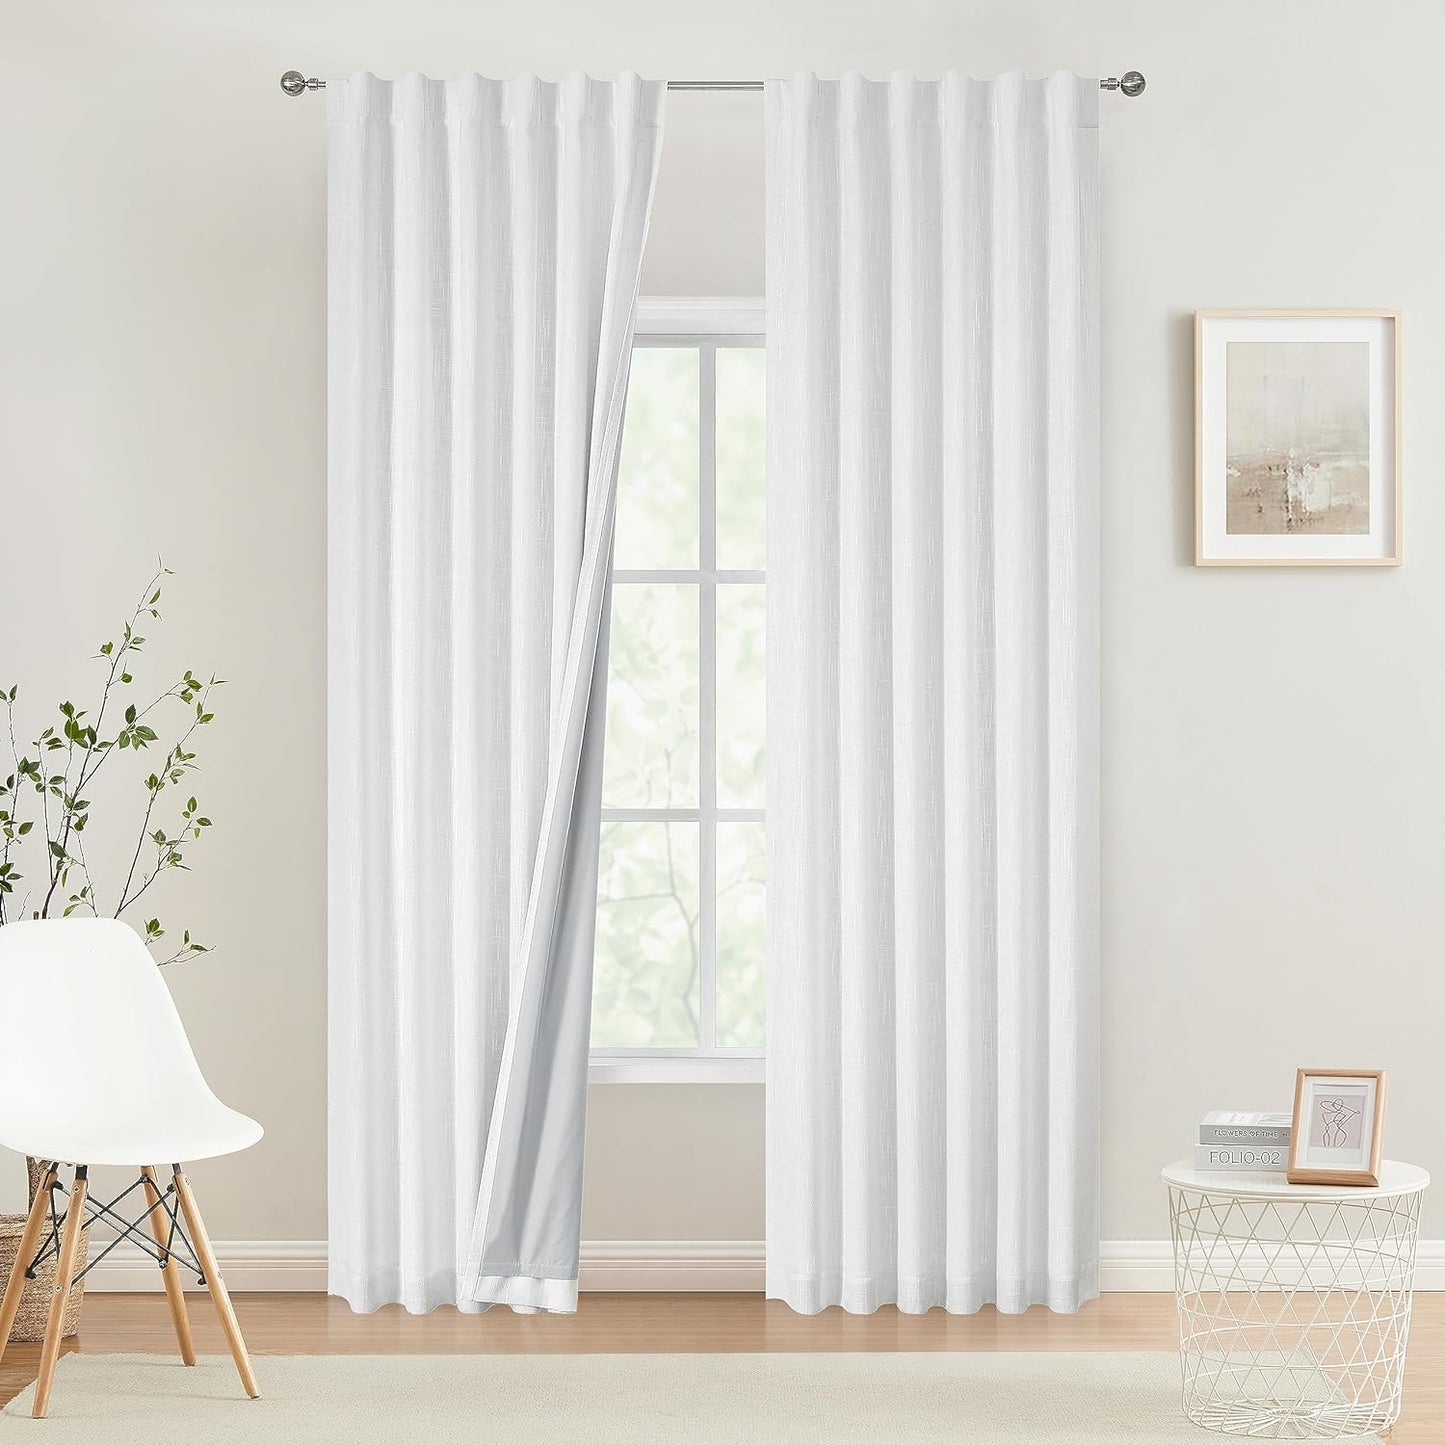 Vision Home Beige Full Blackout Curtains 84 Inch for Bedroom Living Room Darkening Farmhouse Window Treatment Panels Thermal Insulated Rod Pocket Back Tab Soundproof Linen Drapes 2 Panels 50" Wx84 L  Vision Home White 50"X108"X2 